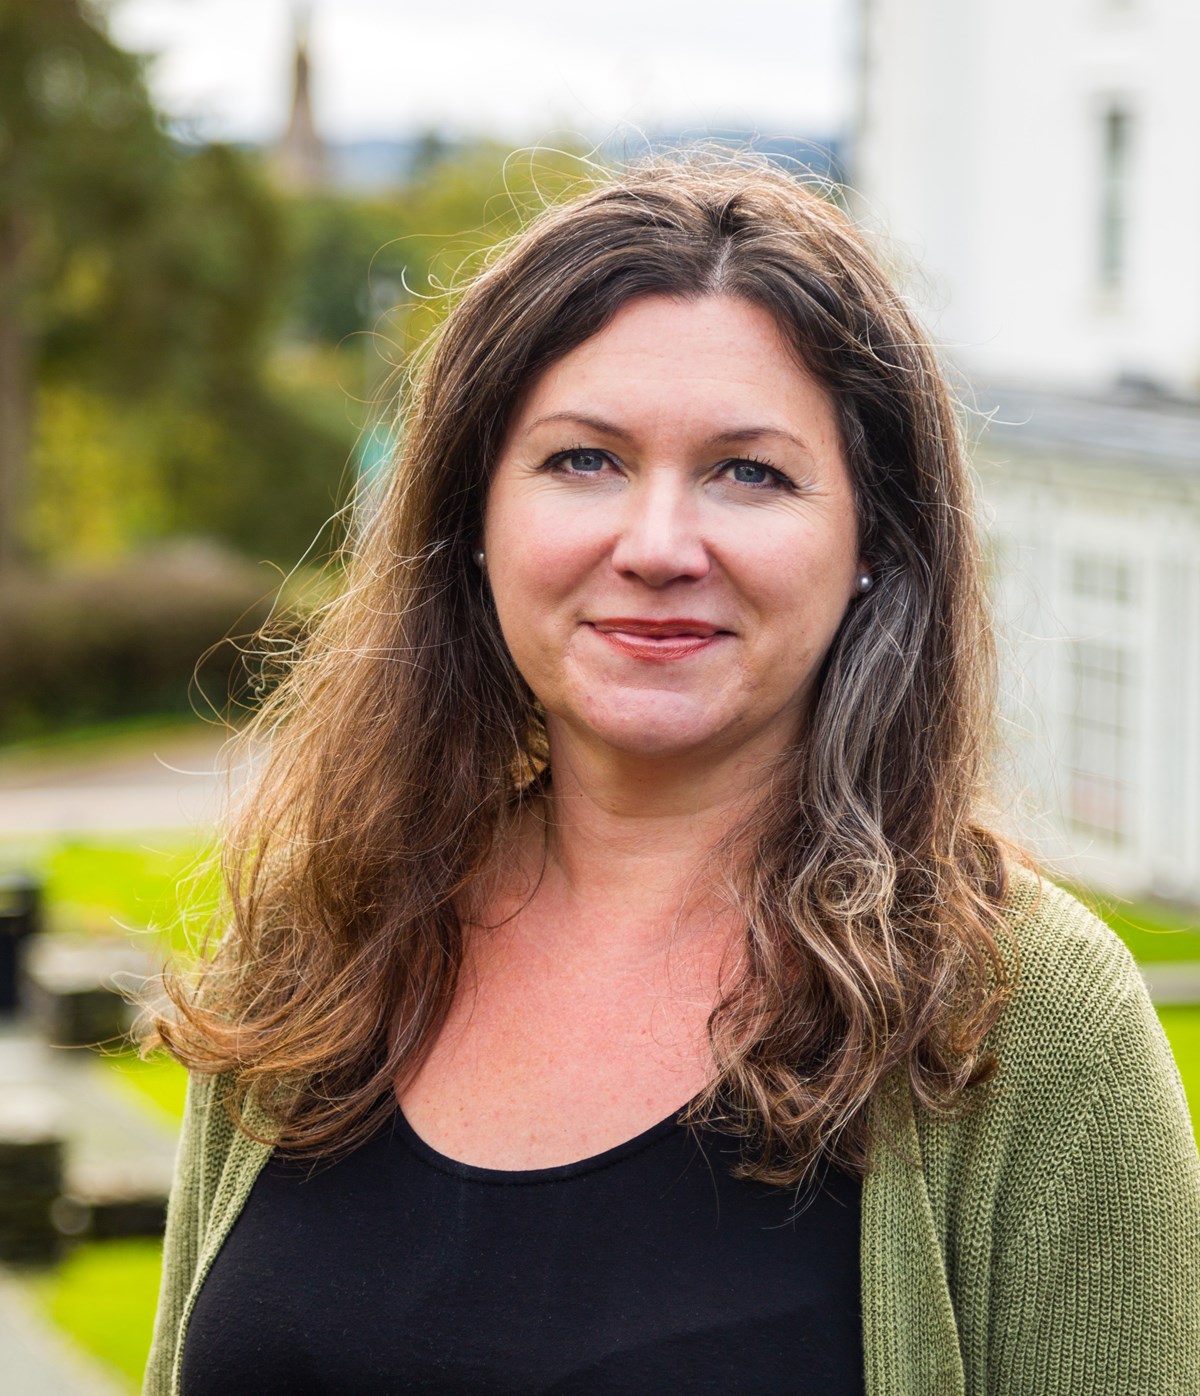 Associate Professor Penny Bradshaw, theme lead for Cultural Landscapes within the University of Cumbria's Centre for National Parks and Protected Areas